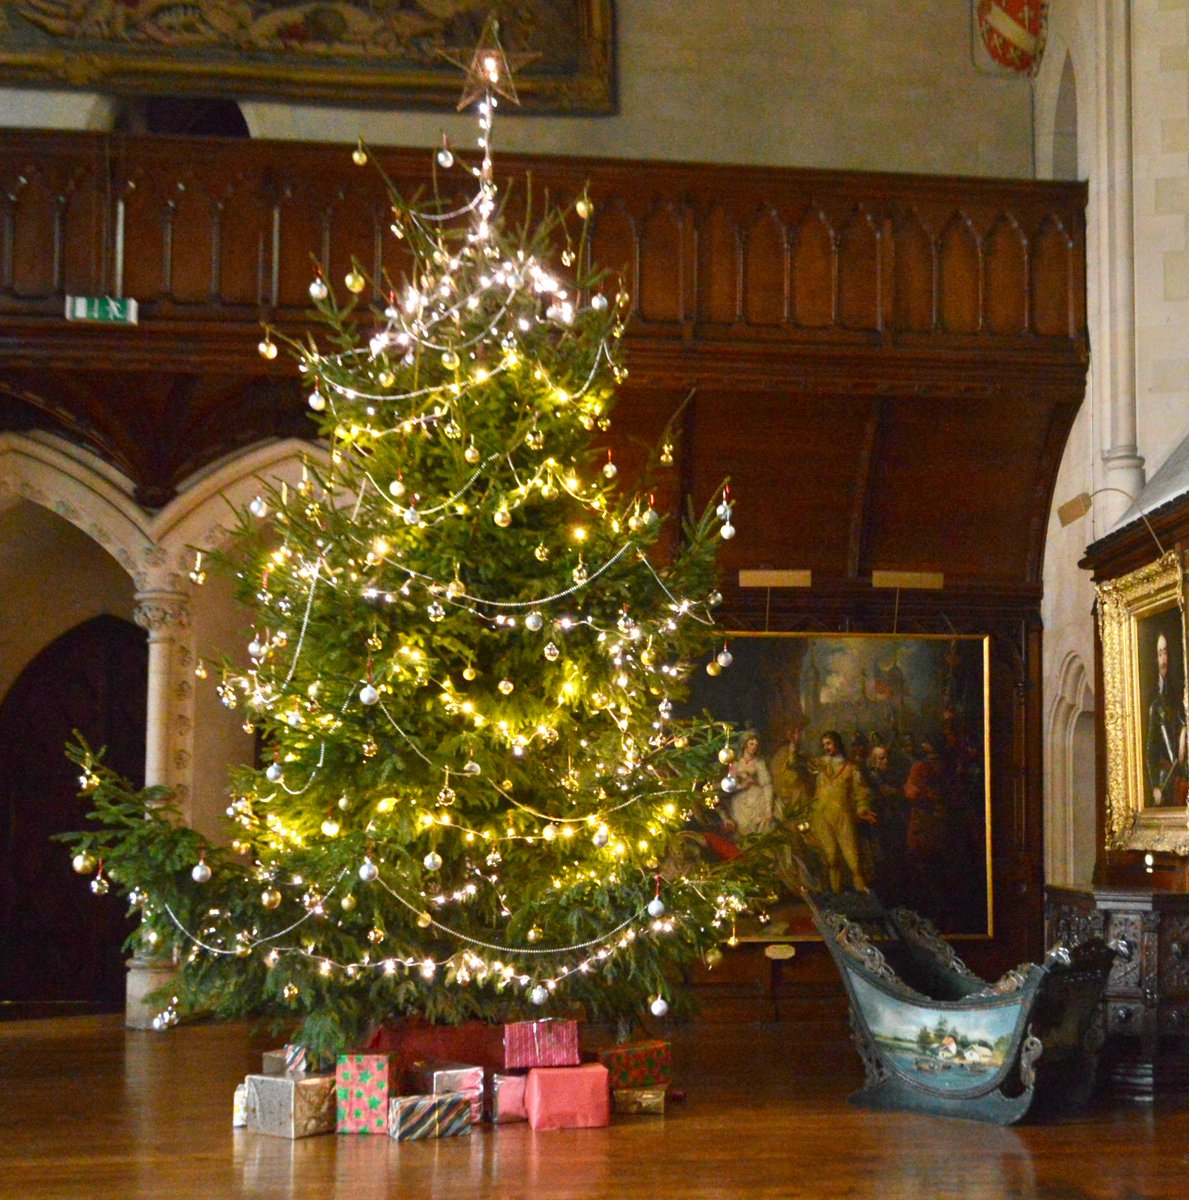 We'd like to wish everyone a very Merry Christmas from the whole team at Arundel Castle!